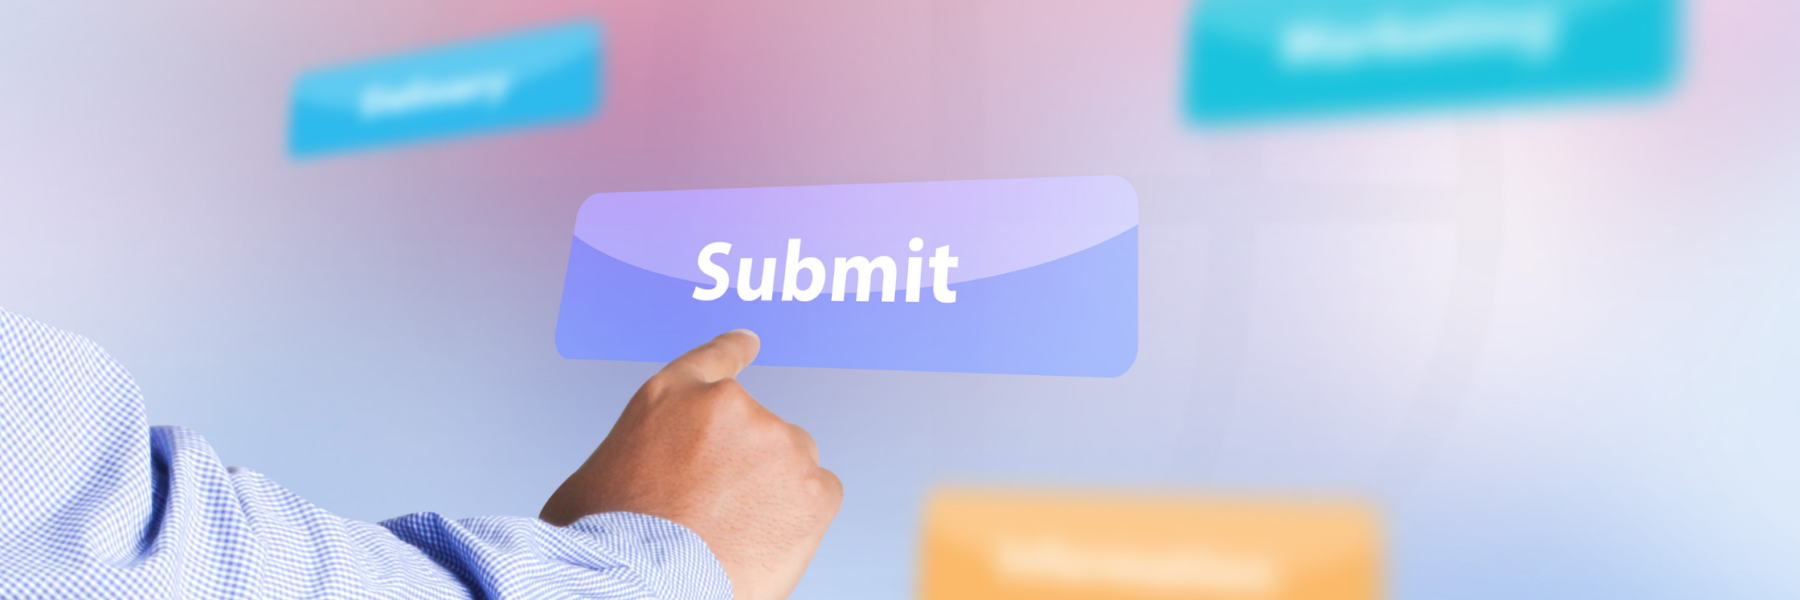 Should a Grant Writer Submit the Grant for Their Client?